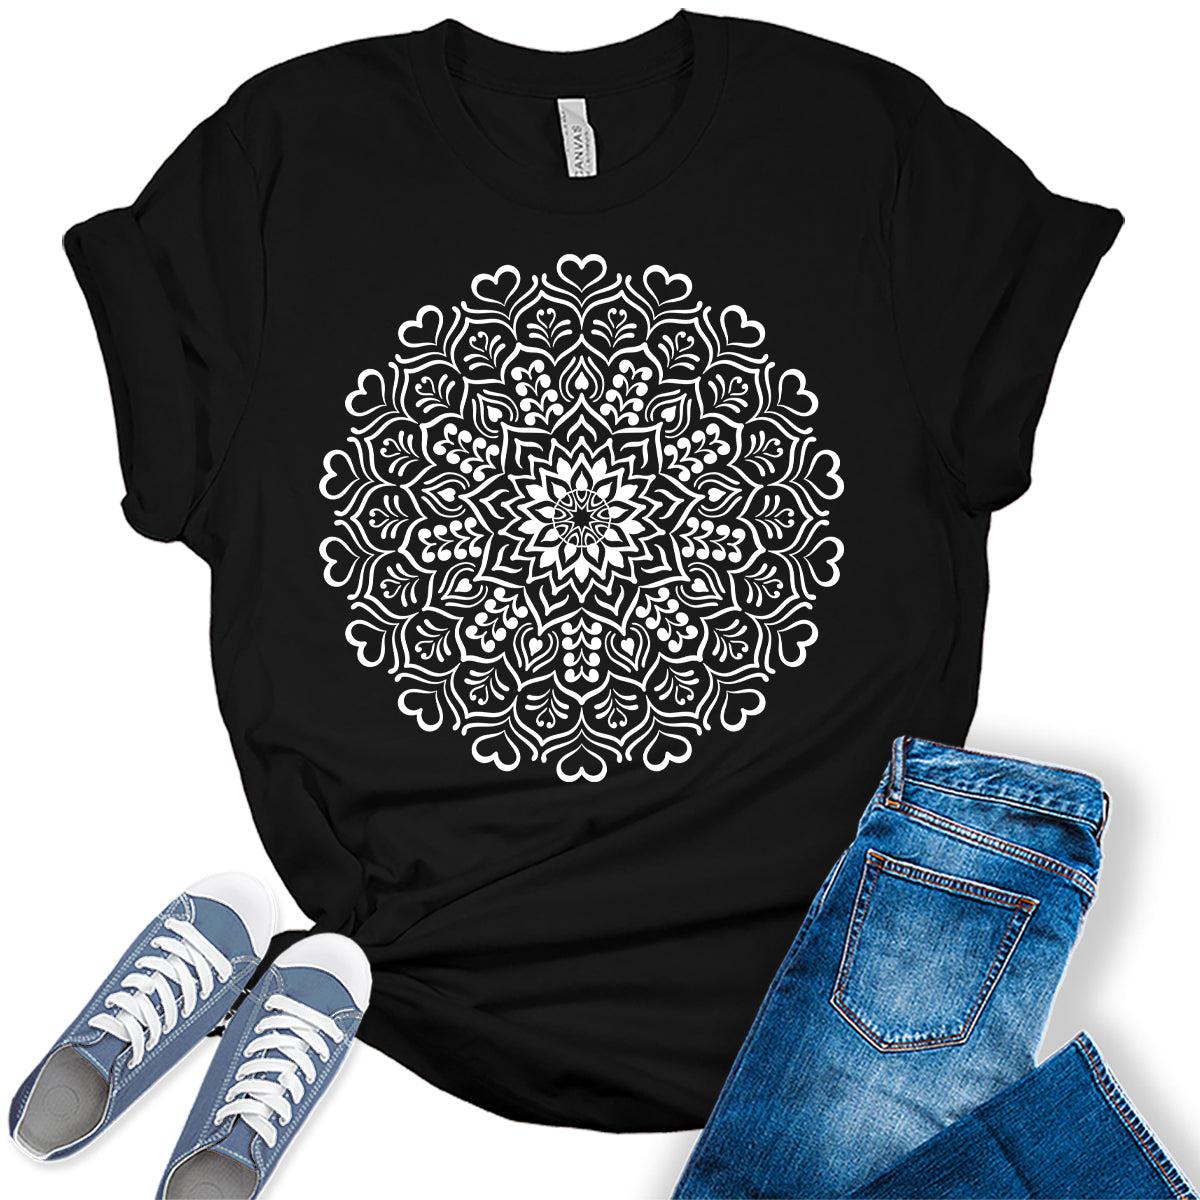 Heart Mandala Shirt Casual Vintage Graphic Tees for Women Short Sleeve Plus Size Summer Tops